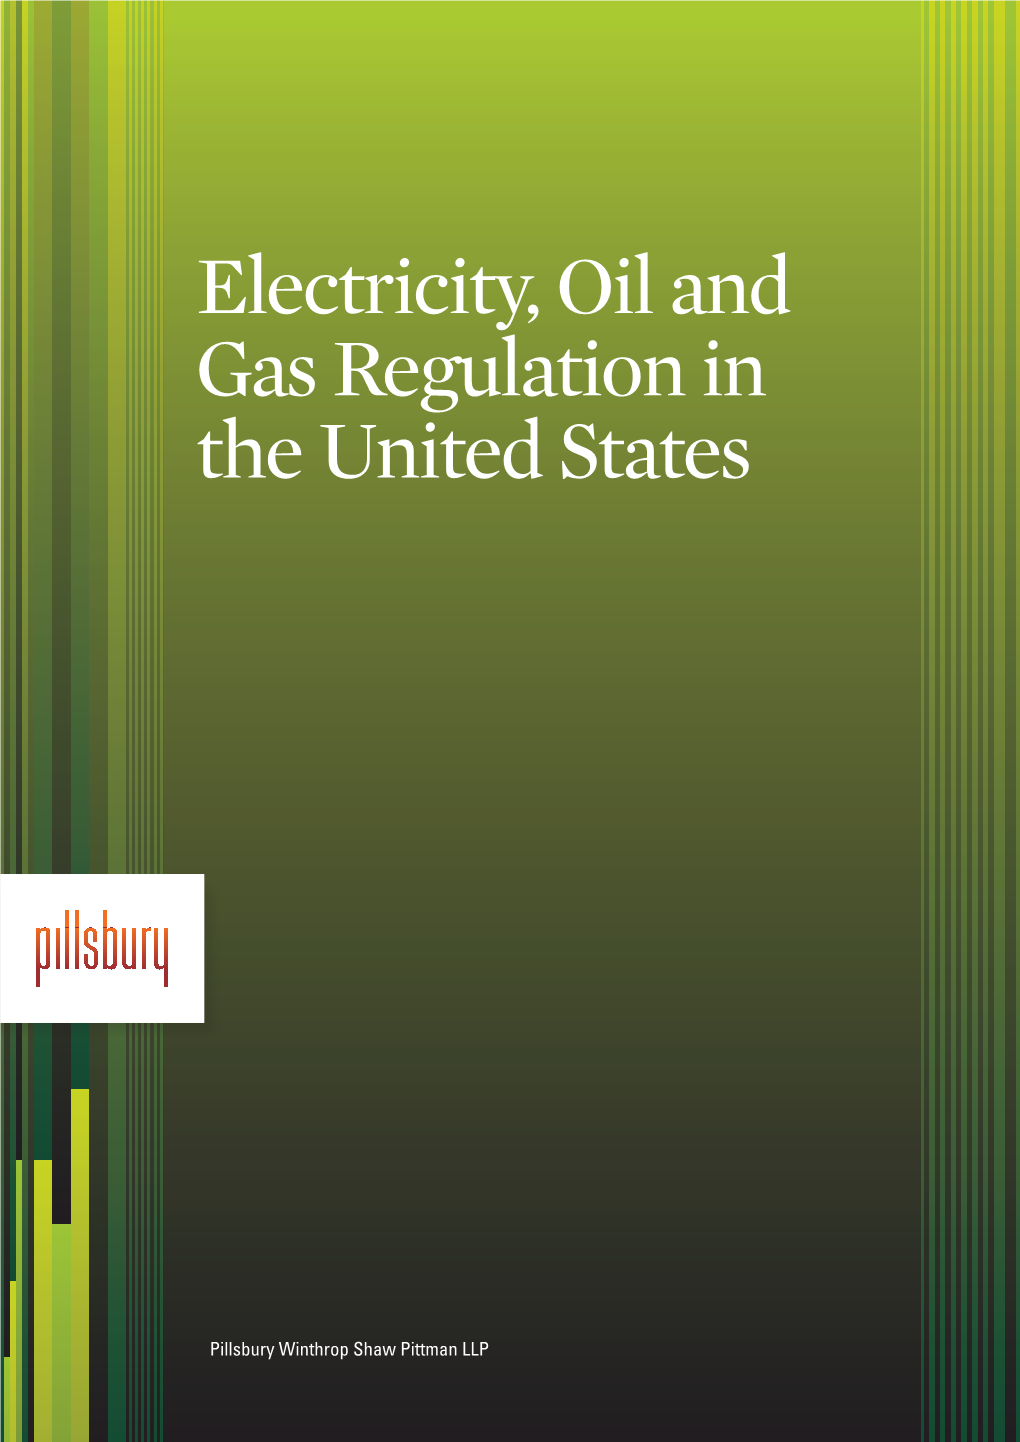 Electricity, Oil and Gas Regulation in the United States